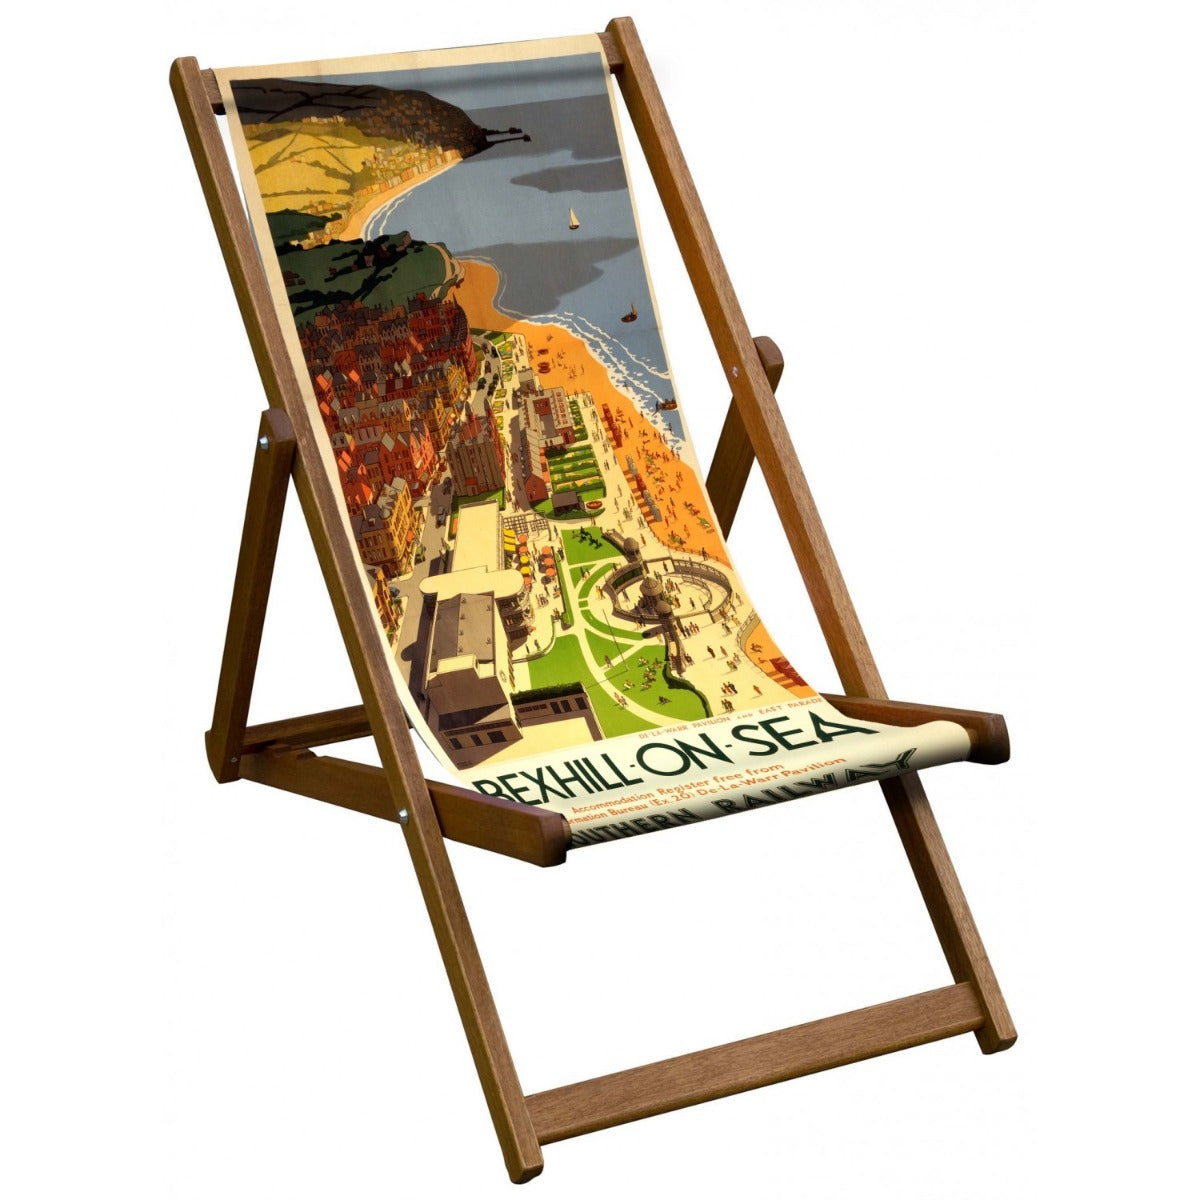 Vintage Inspired Wooden Deckchair- Bexhill on Sea- National Railway Museum Poster